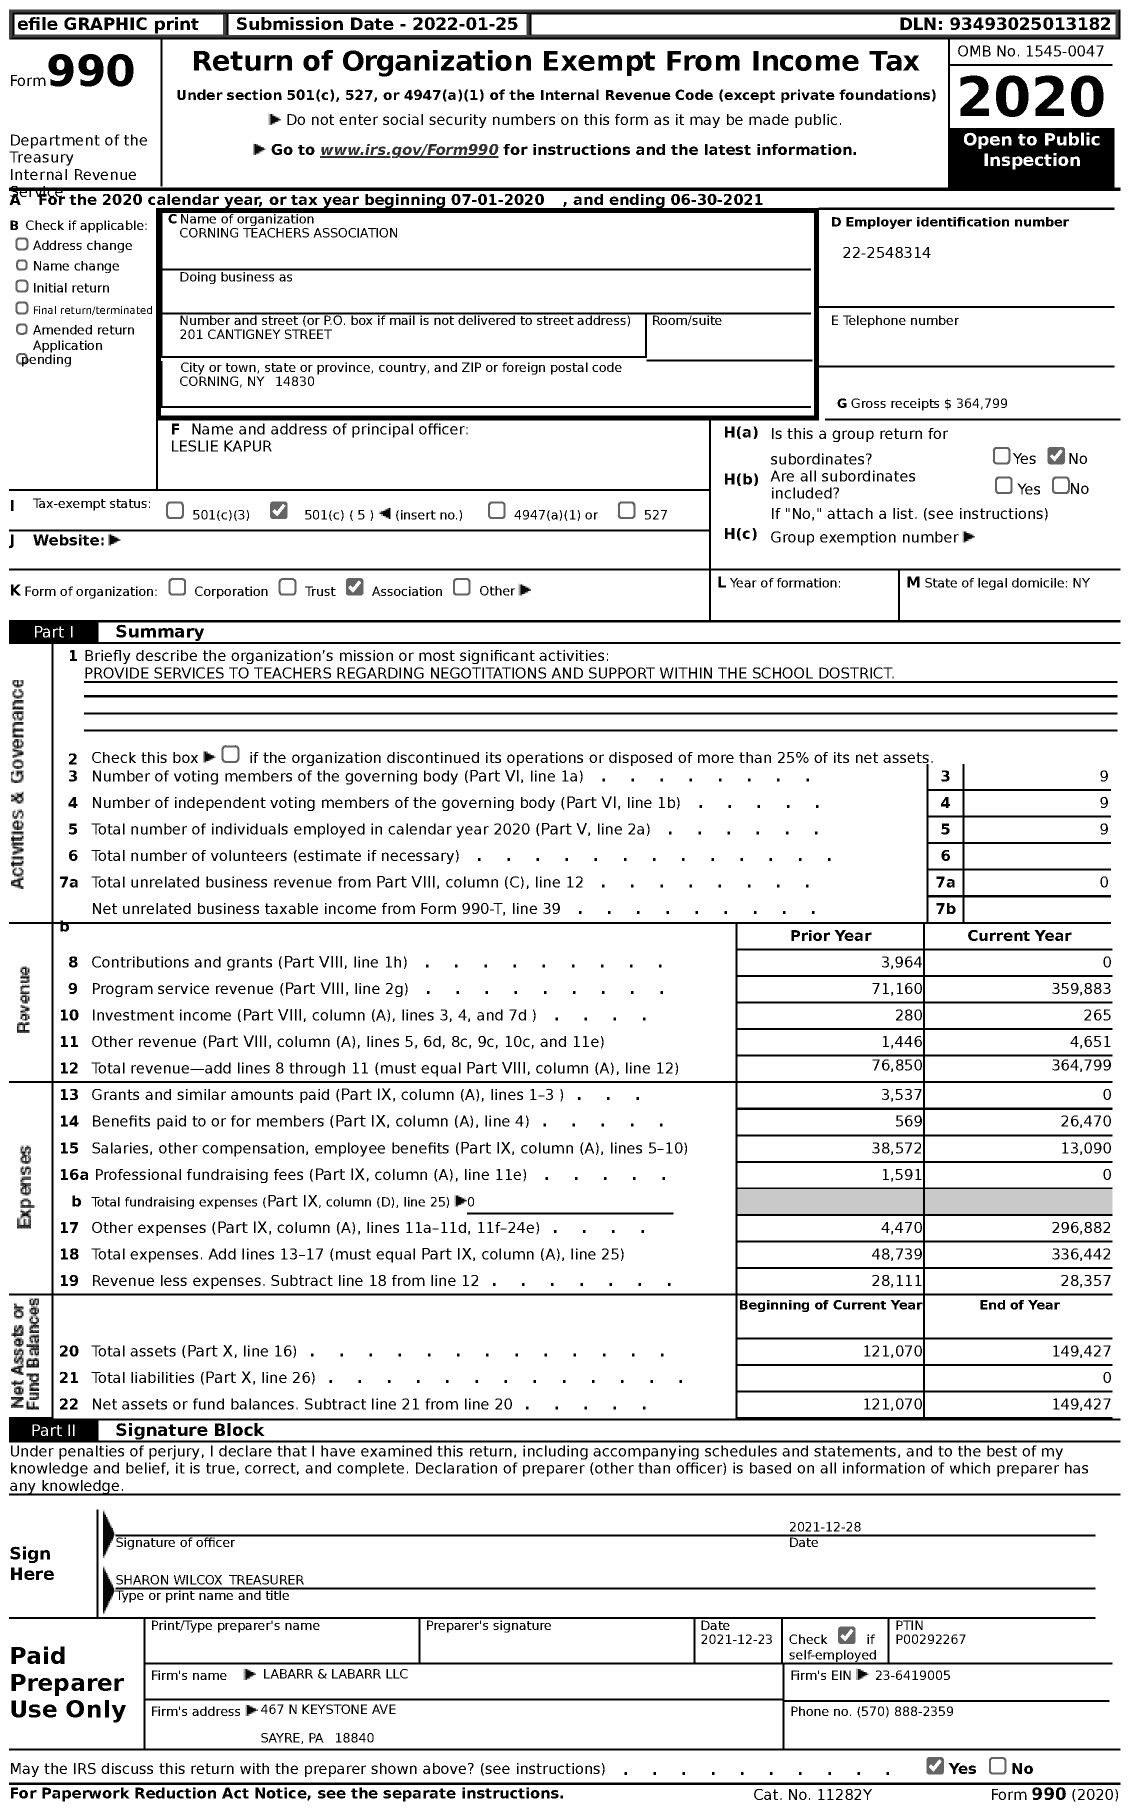 Image of first page of 2020 Form 990 for American Federation of Teachers - 2589 Corning Teachers Association